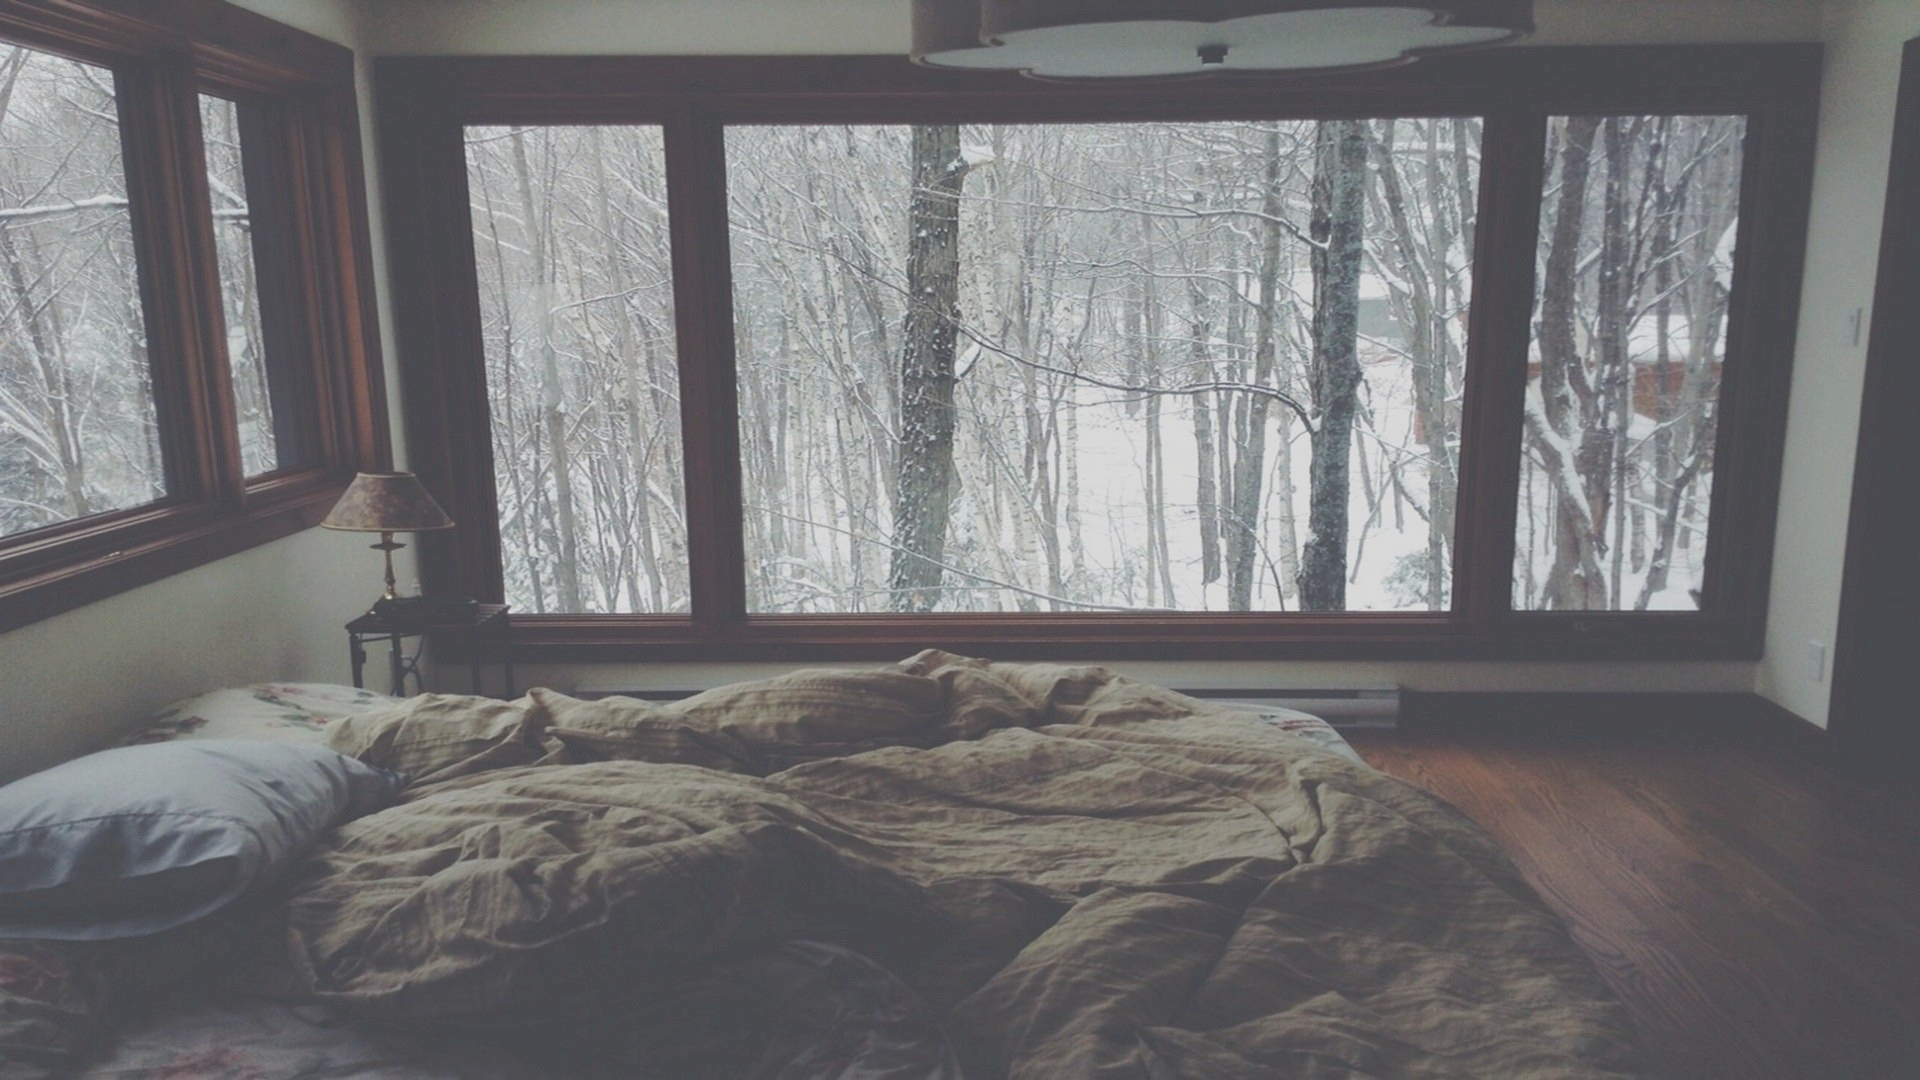 a_bed_with_a_view_of_trees_outside.jpg